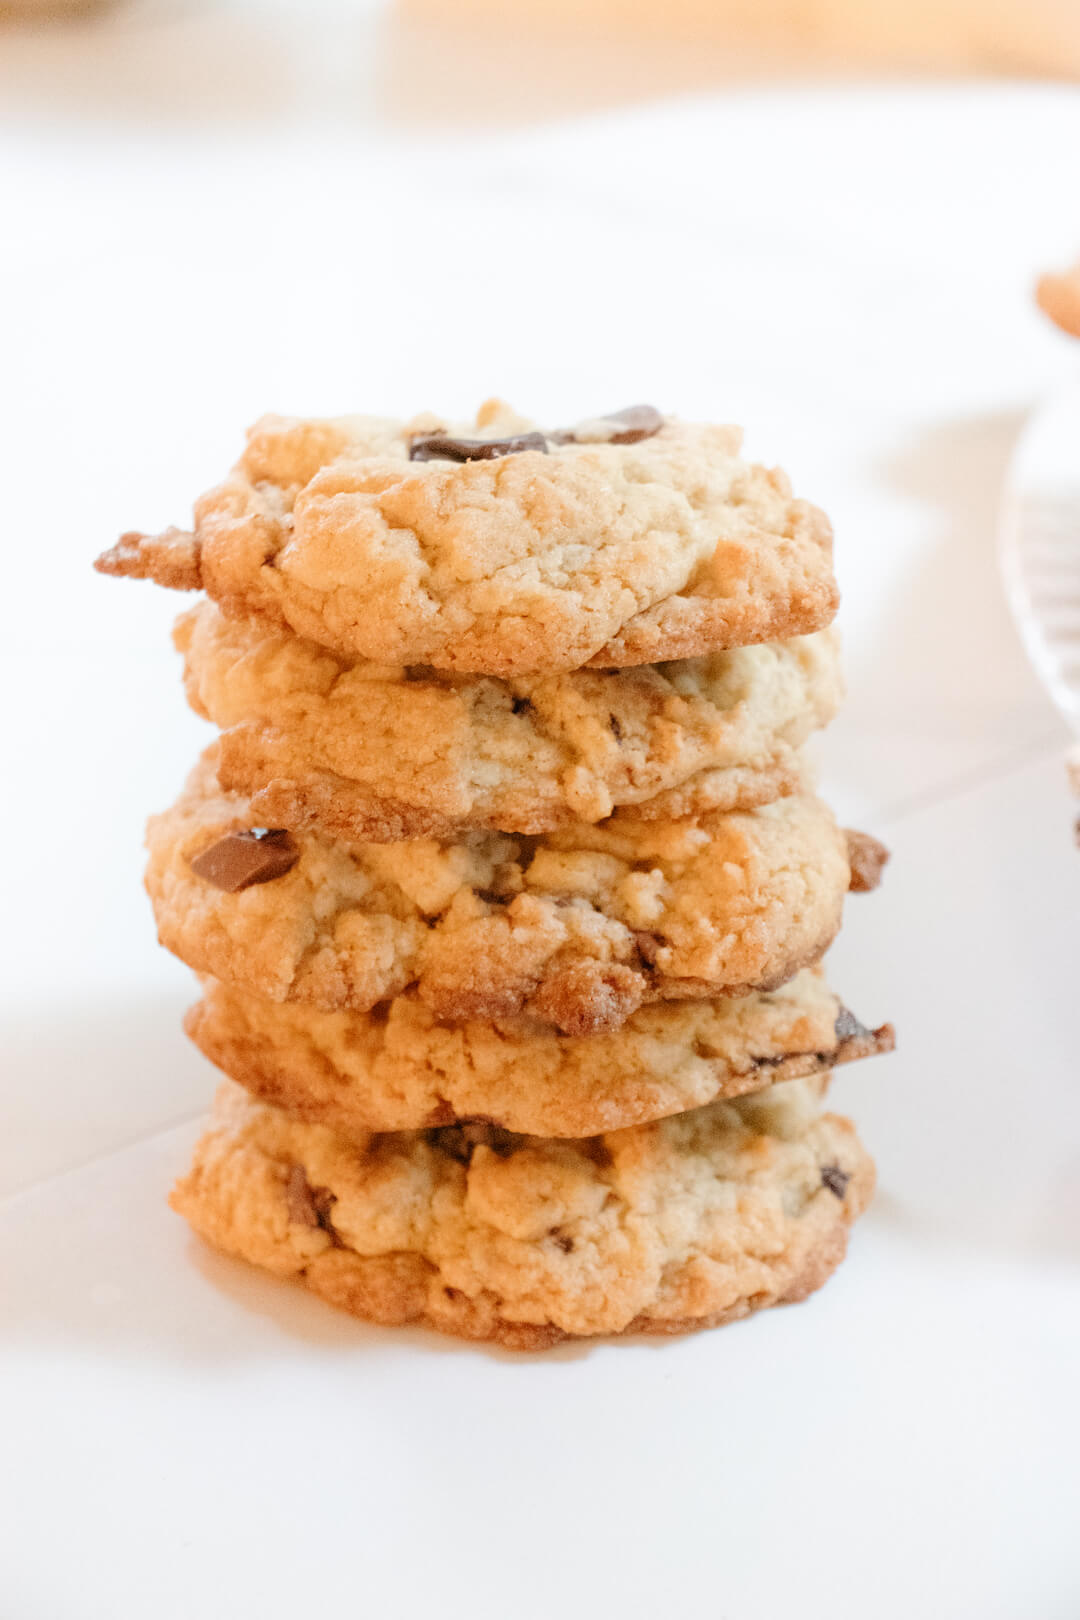 Bakery Style Chocolate Chip Cookies Recipe